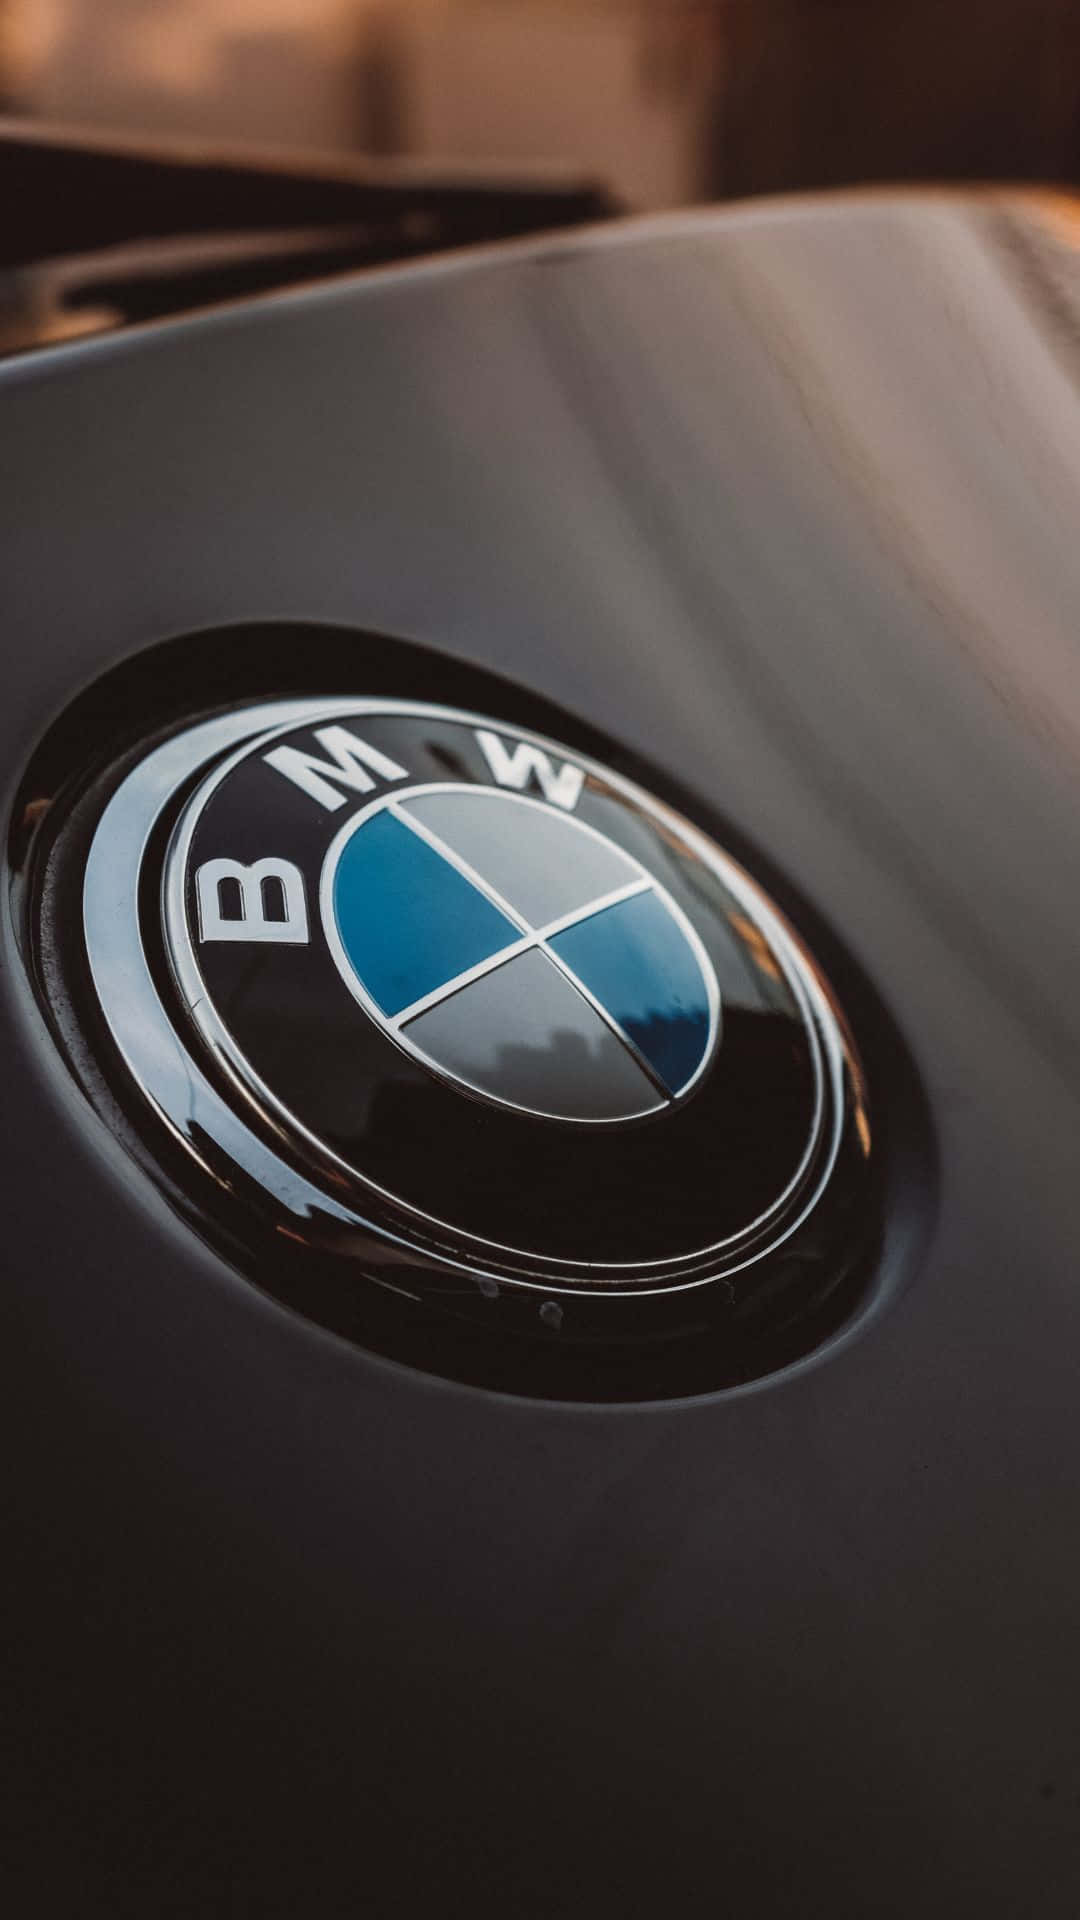 Take control of your BMW with Android